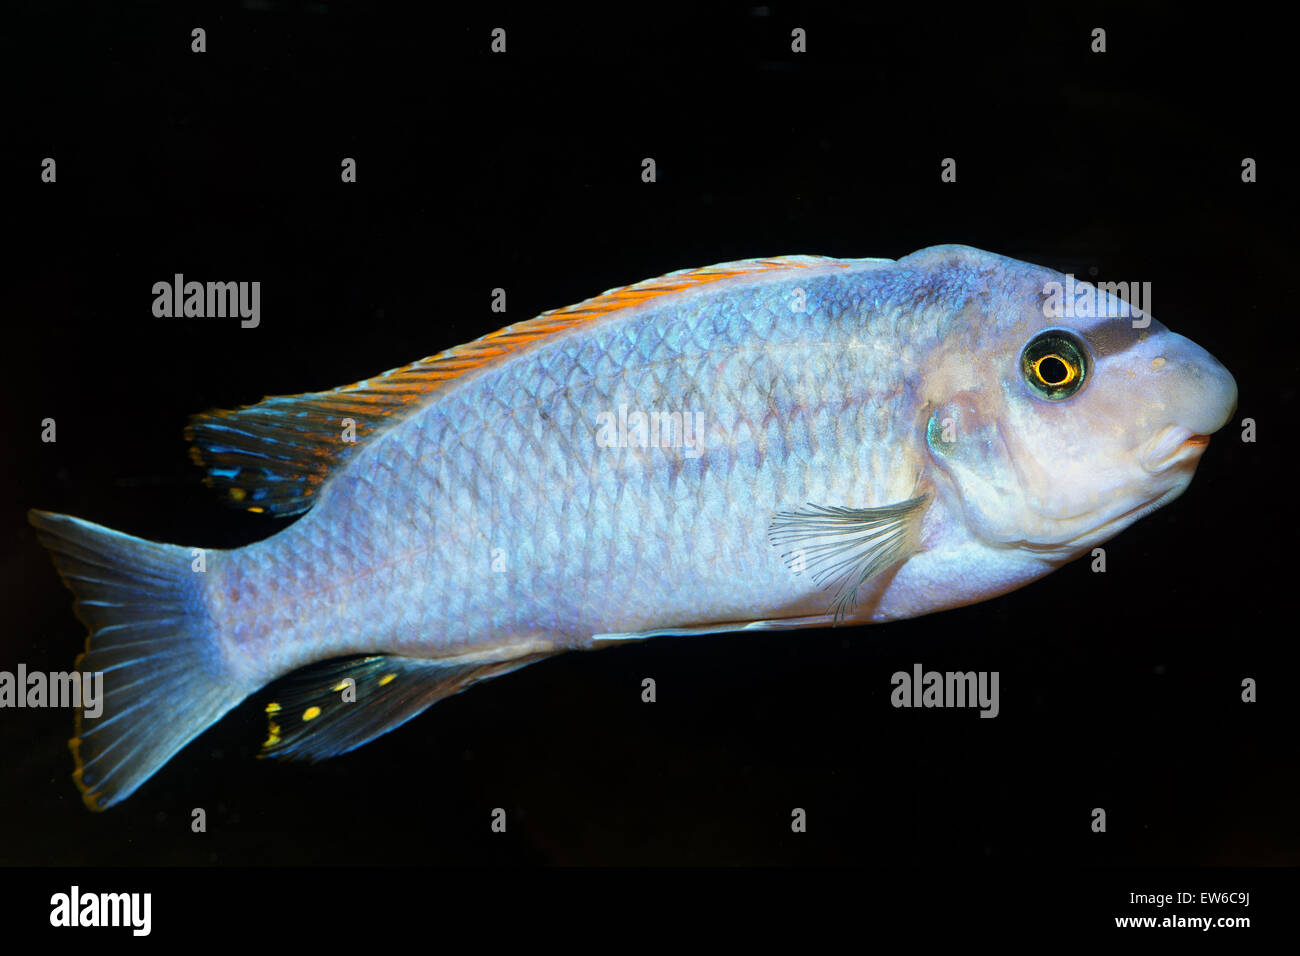 Blue cichlid fish from genus Labeotropheus on the black background. Stock Photo